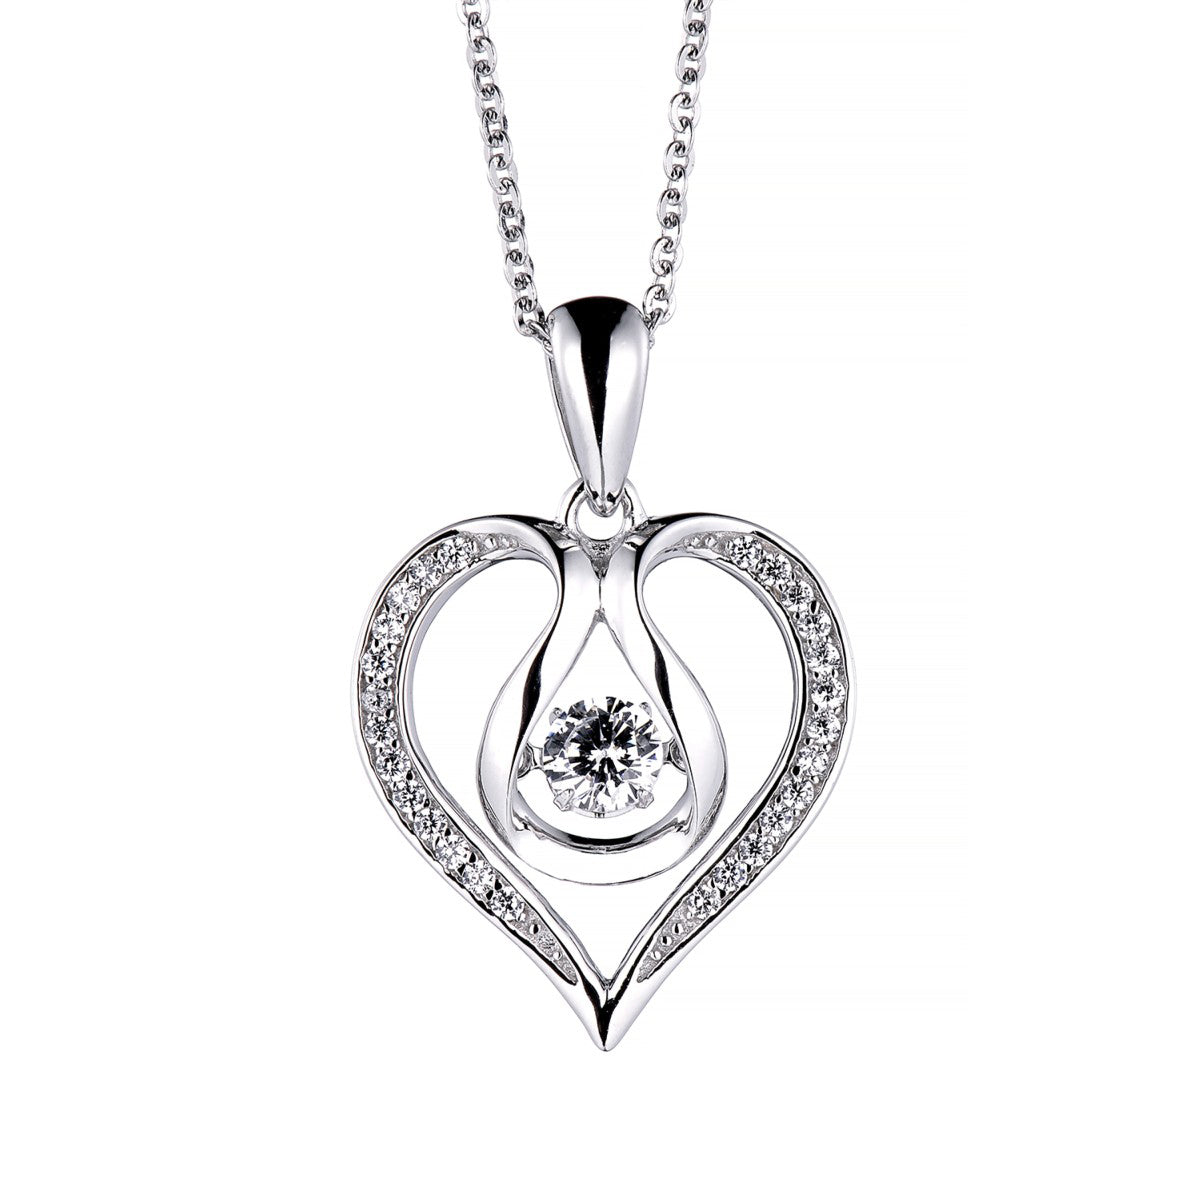 Peach heart smart 925 sterling silver necklace